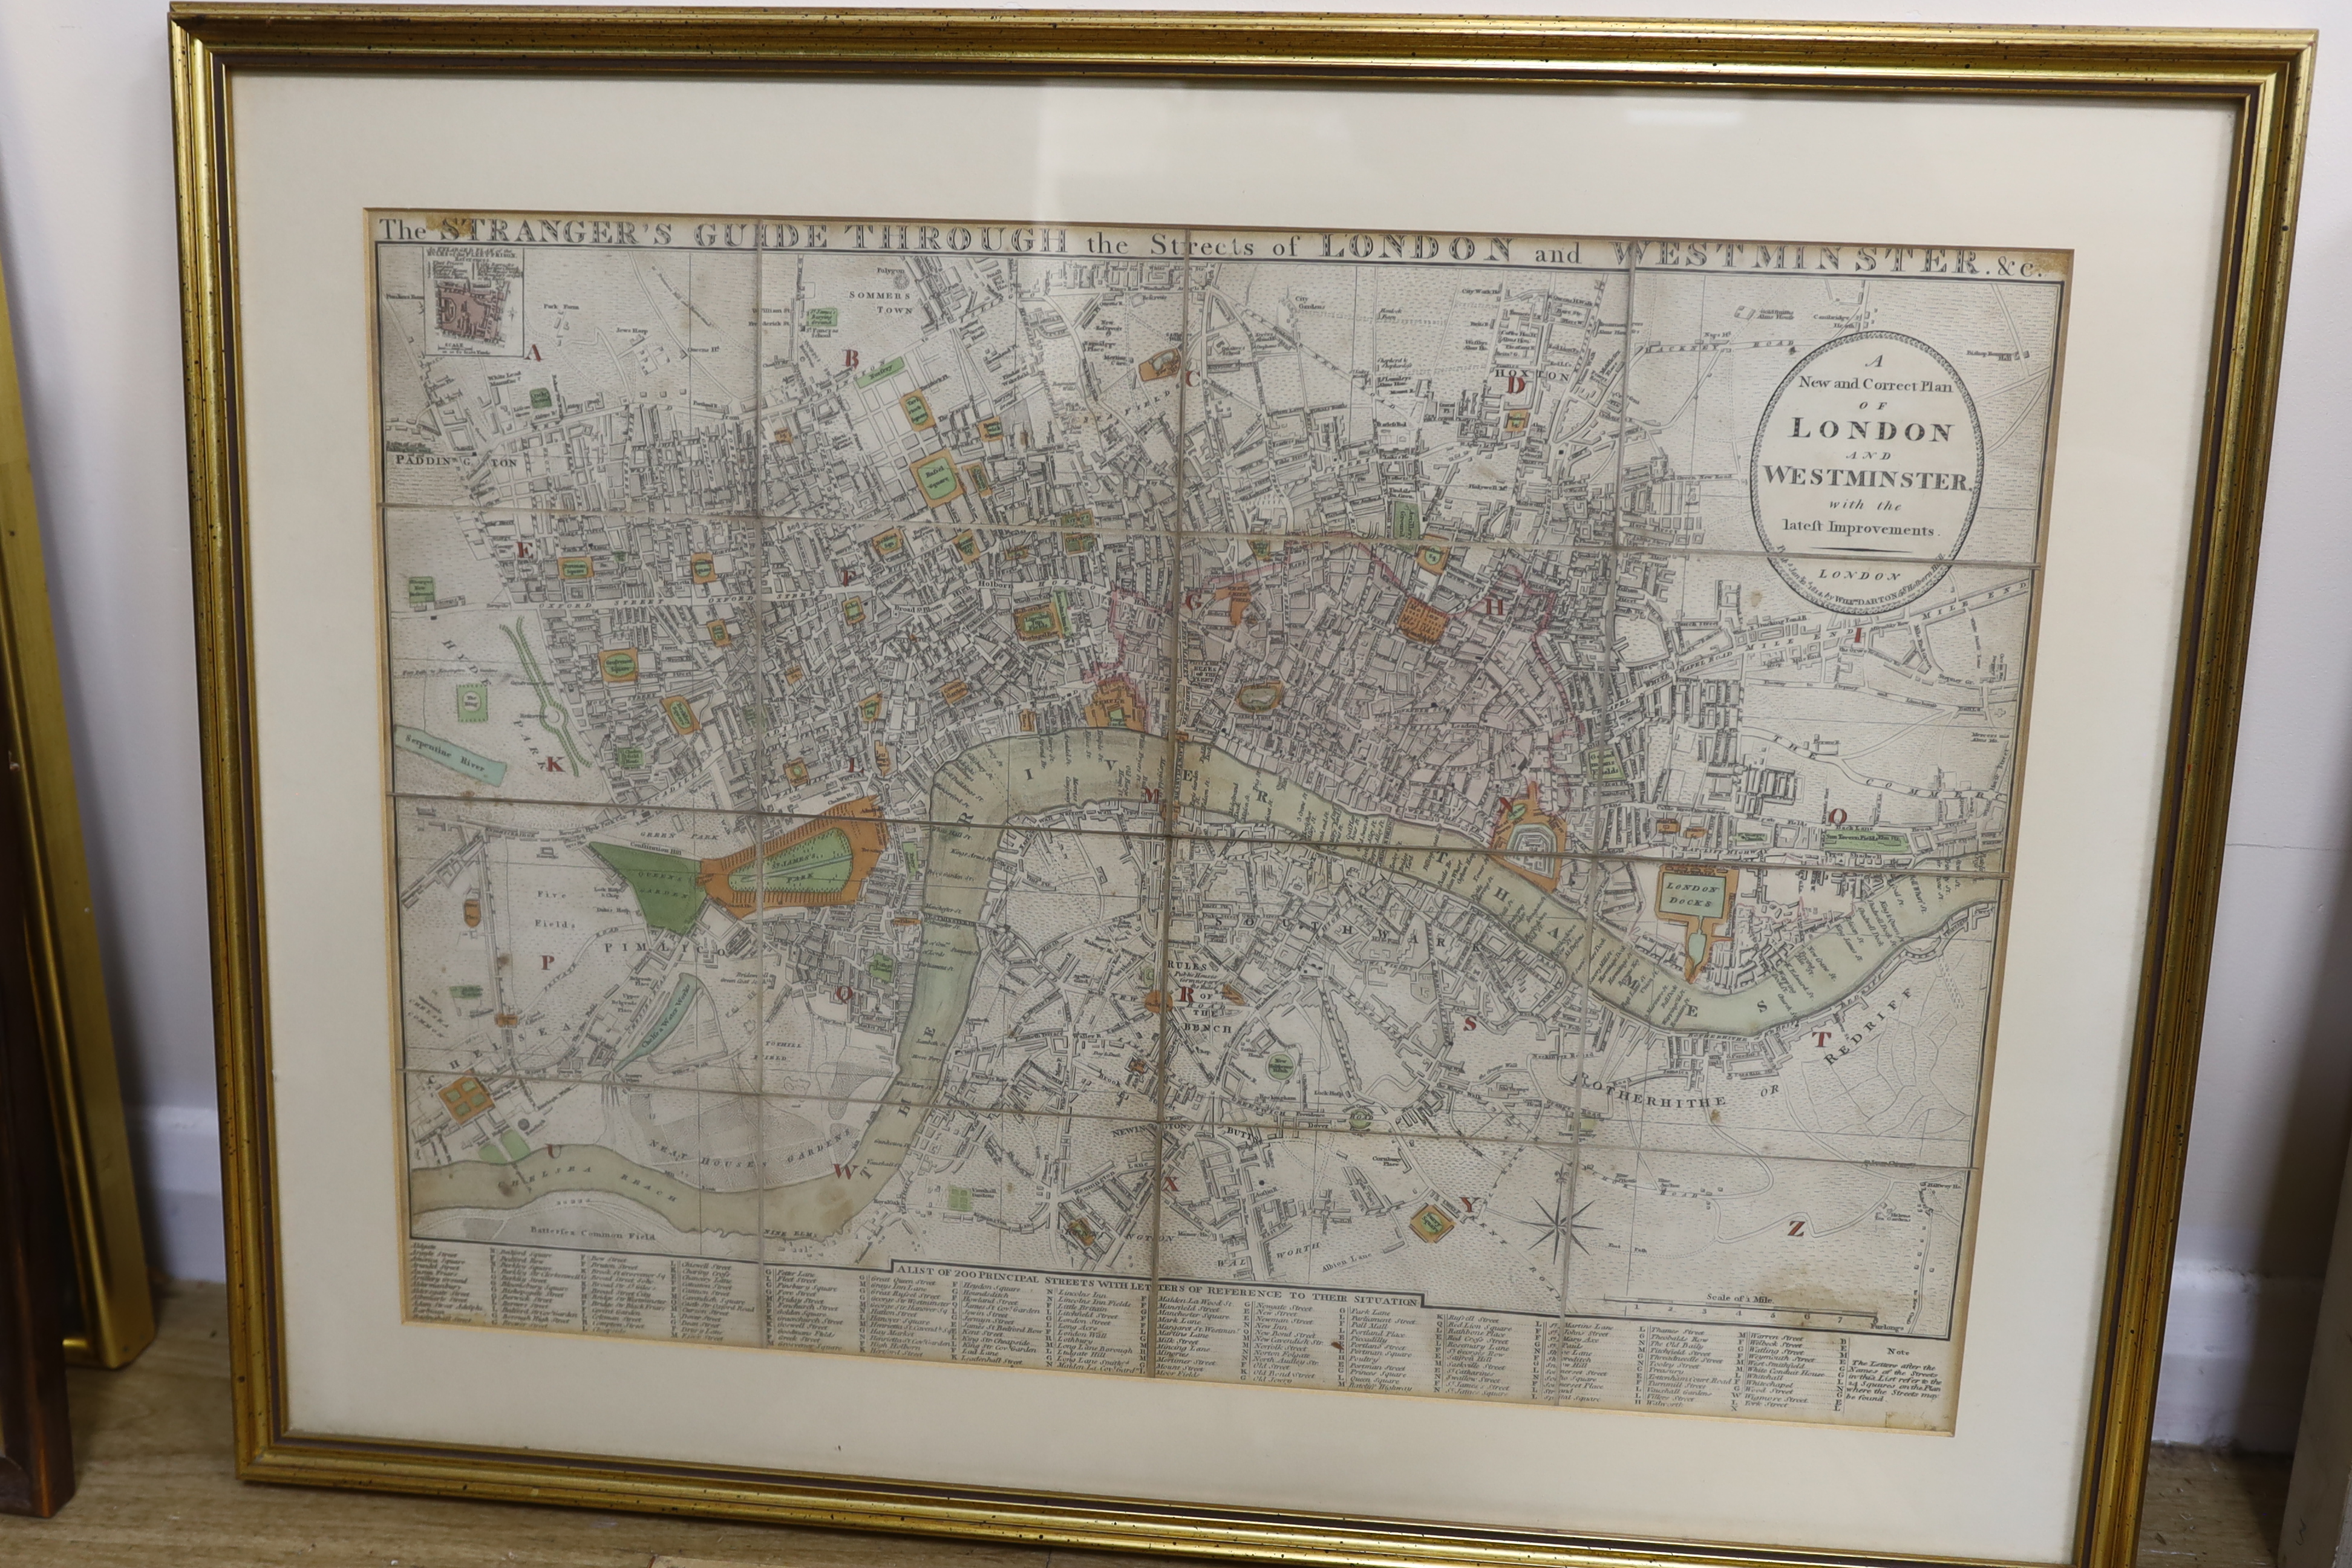 William Darton (1755-1819), folding hand coloured map, New and Correct Plan of London and Westminster with the Latest Improvements, publ. 1814, William Darton, framed, together with John Cary, hand coloured engraved map